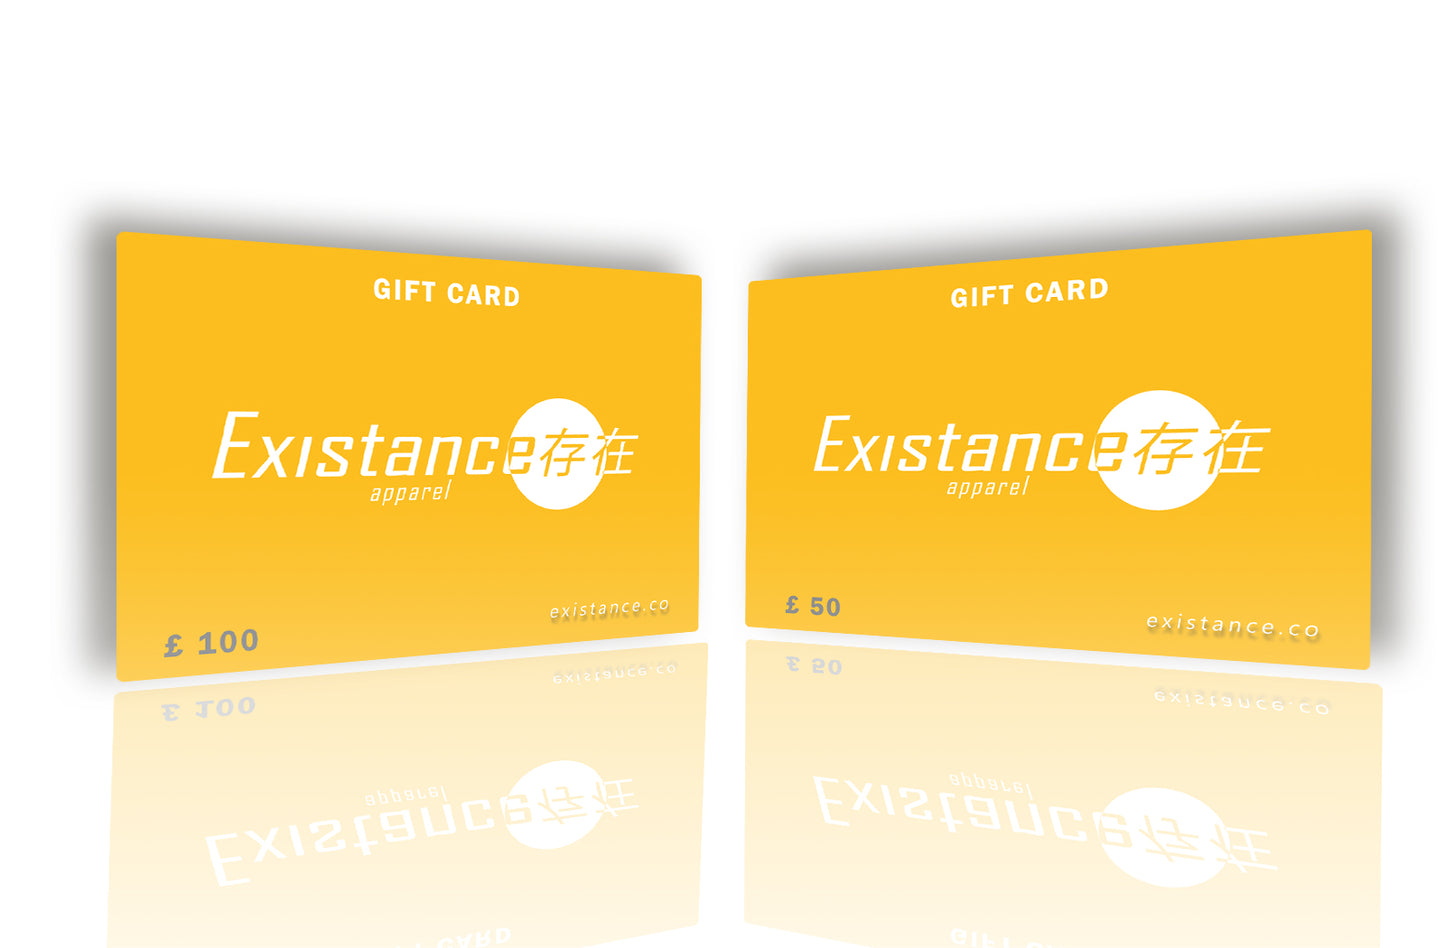 Existance.co gift card